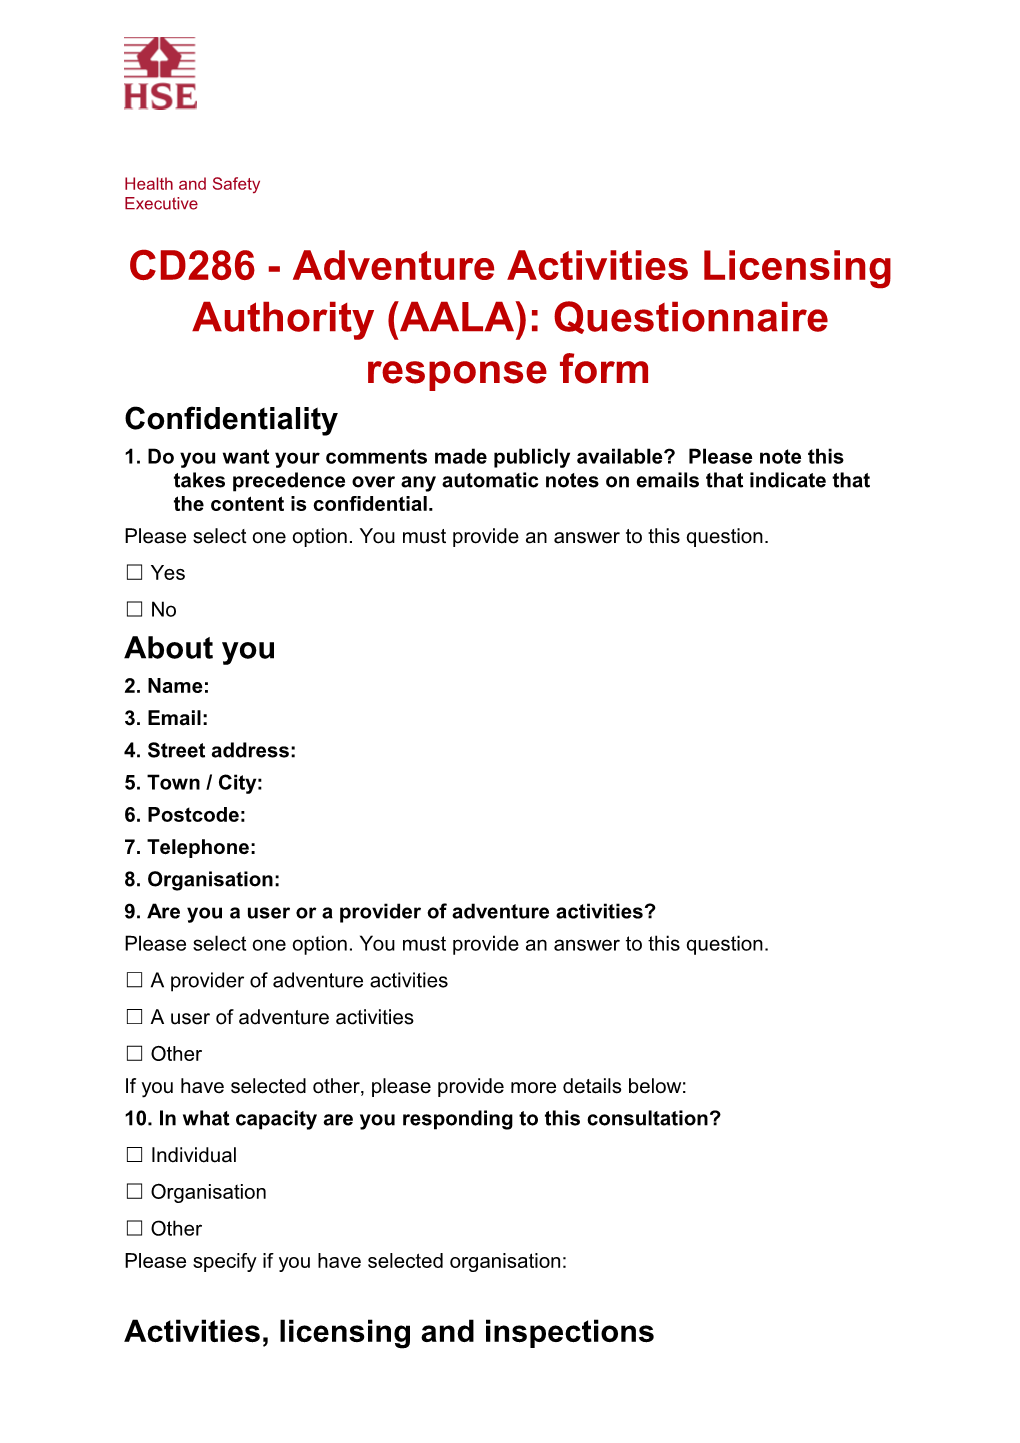 CD286 - Adventure Activities Licensing Authority (AALA): Questionnaire Response Form